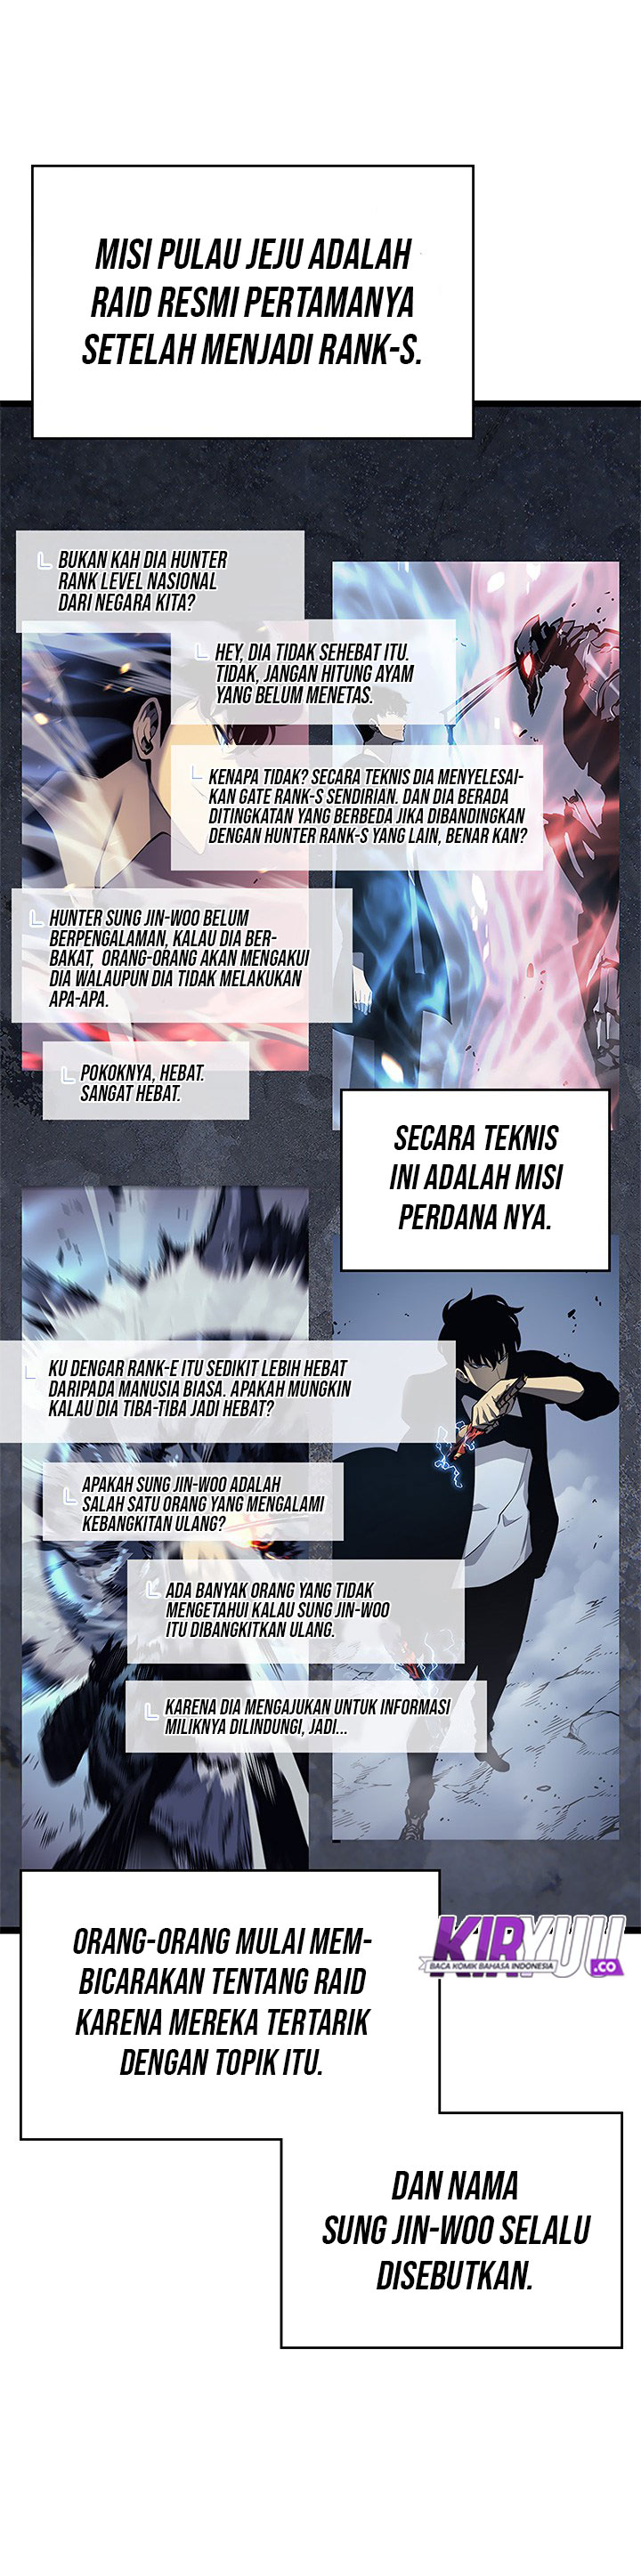 Solo Leveling Chapter 108